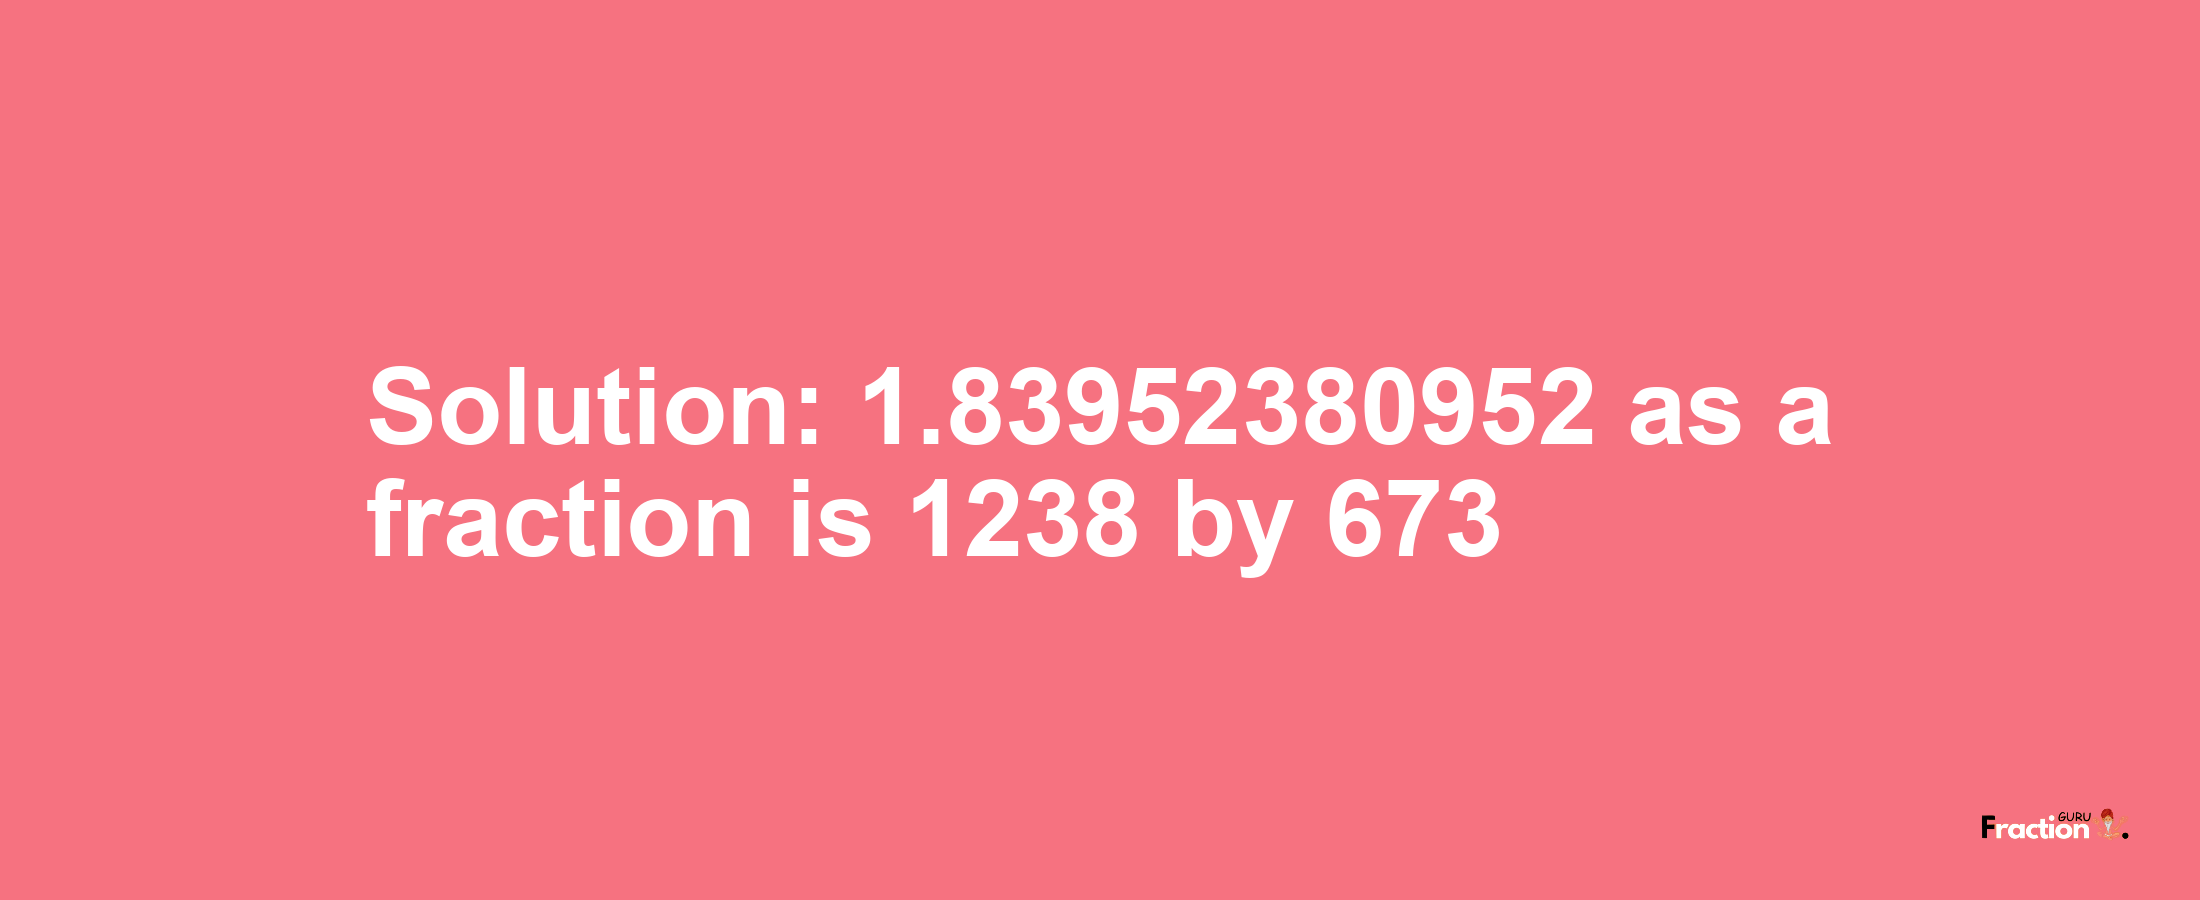 Solution:1.83952380952 as a fraction is 1238/673